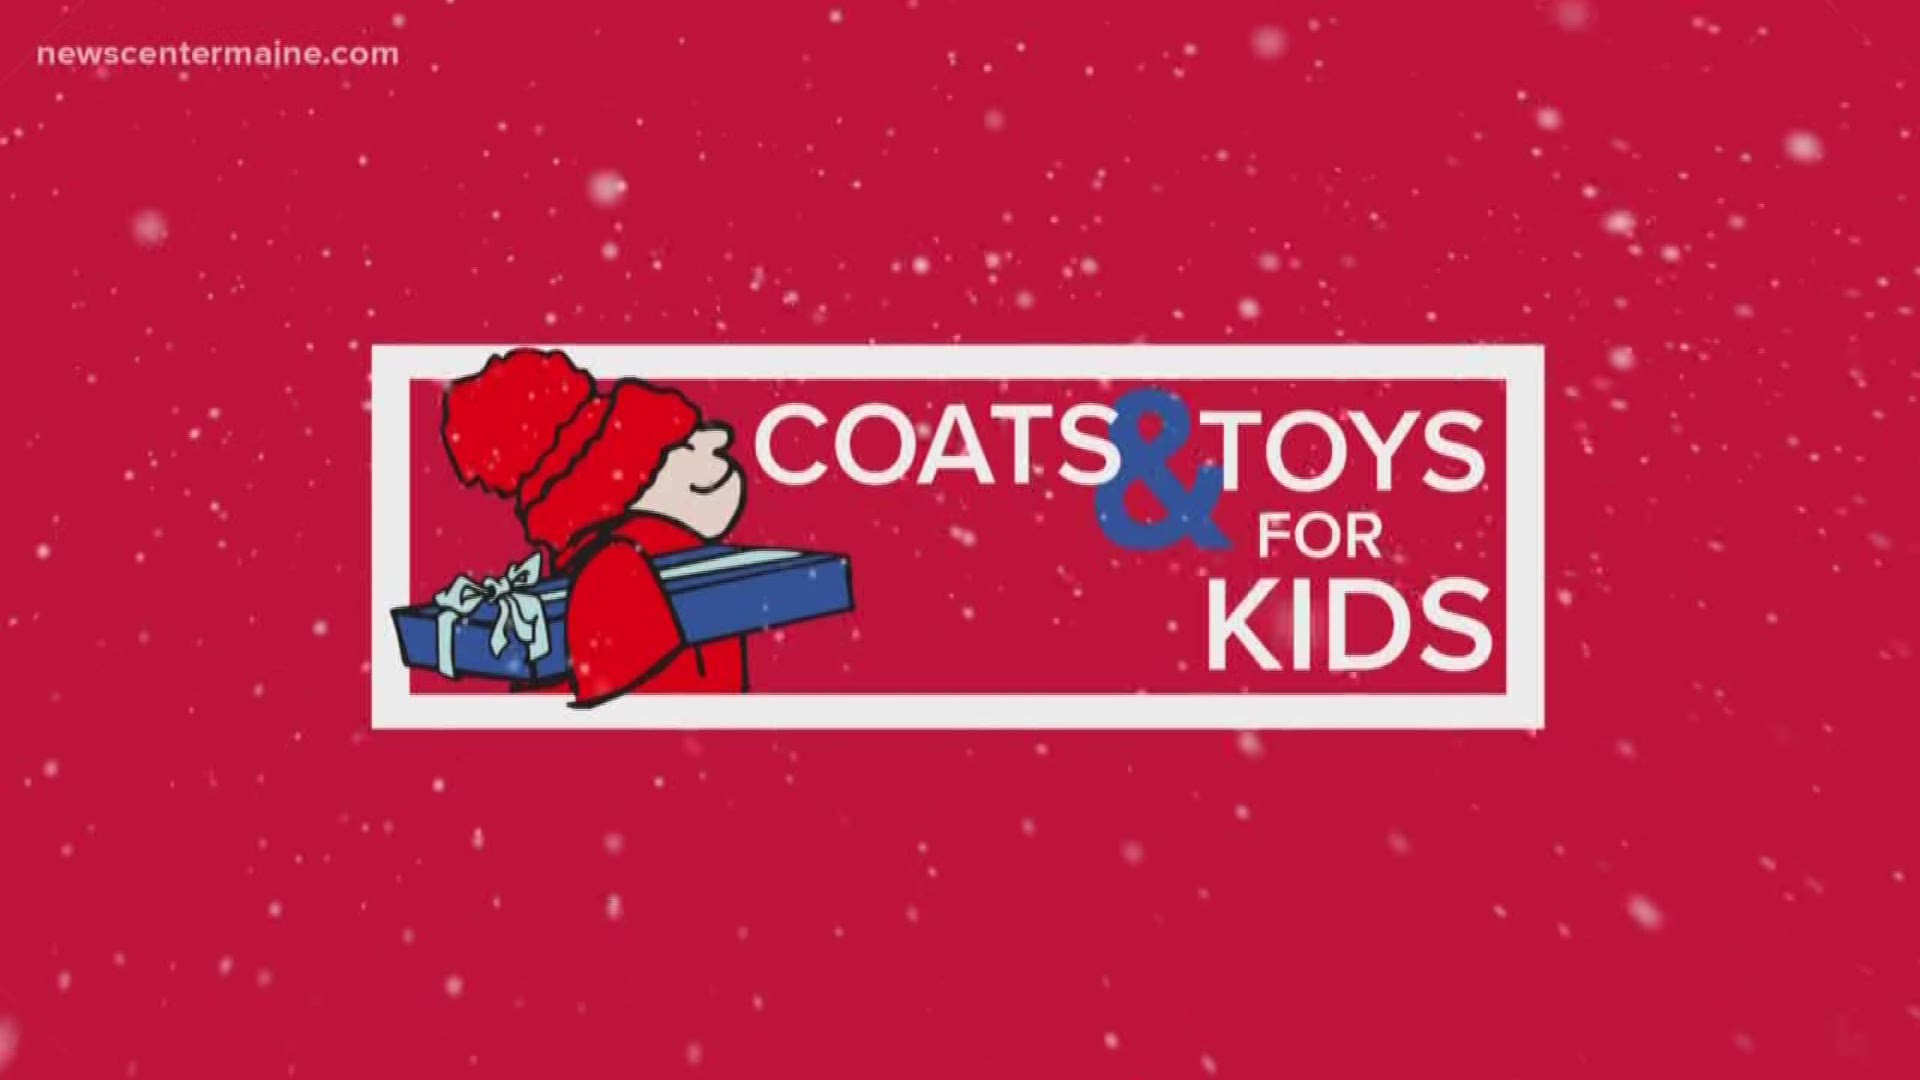 Coats & Toys for Kids Day is this Saturday, Dec. 1